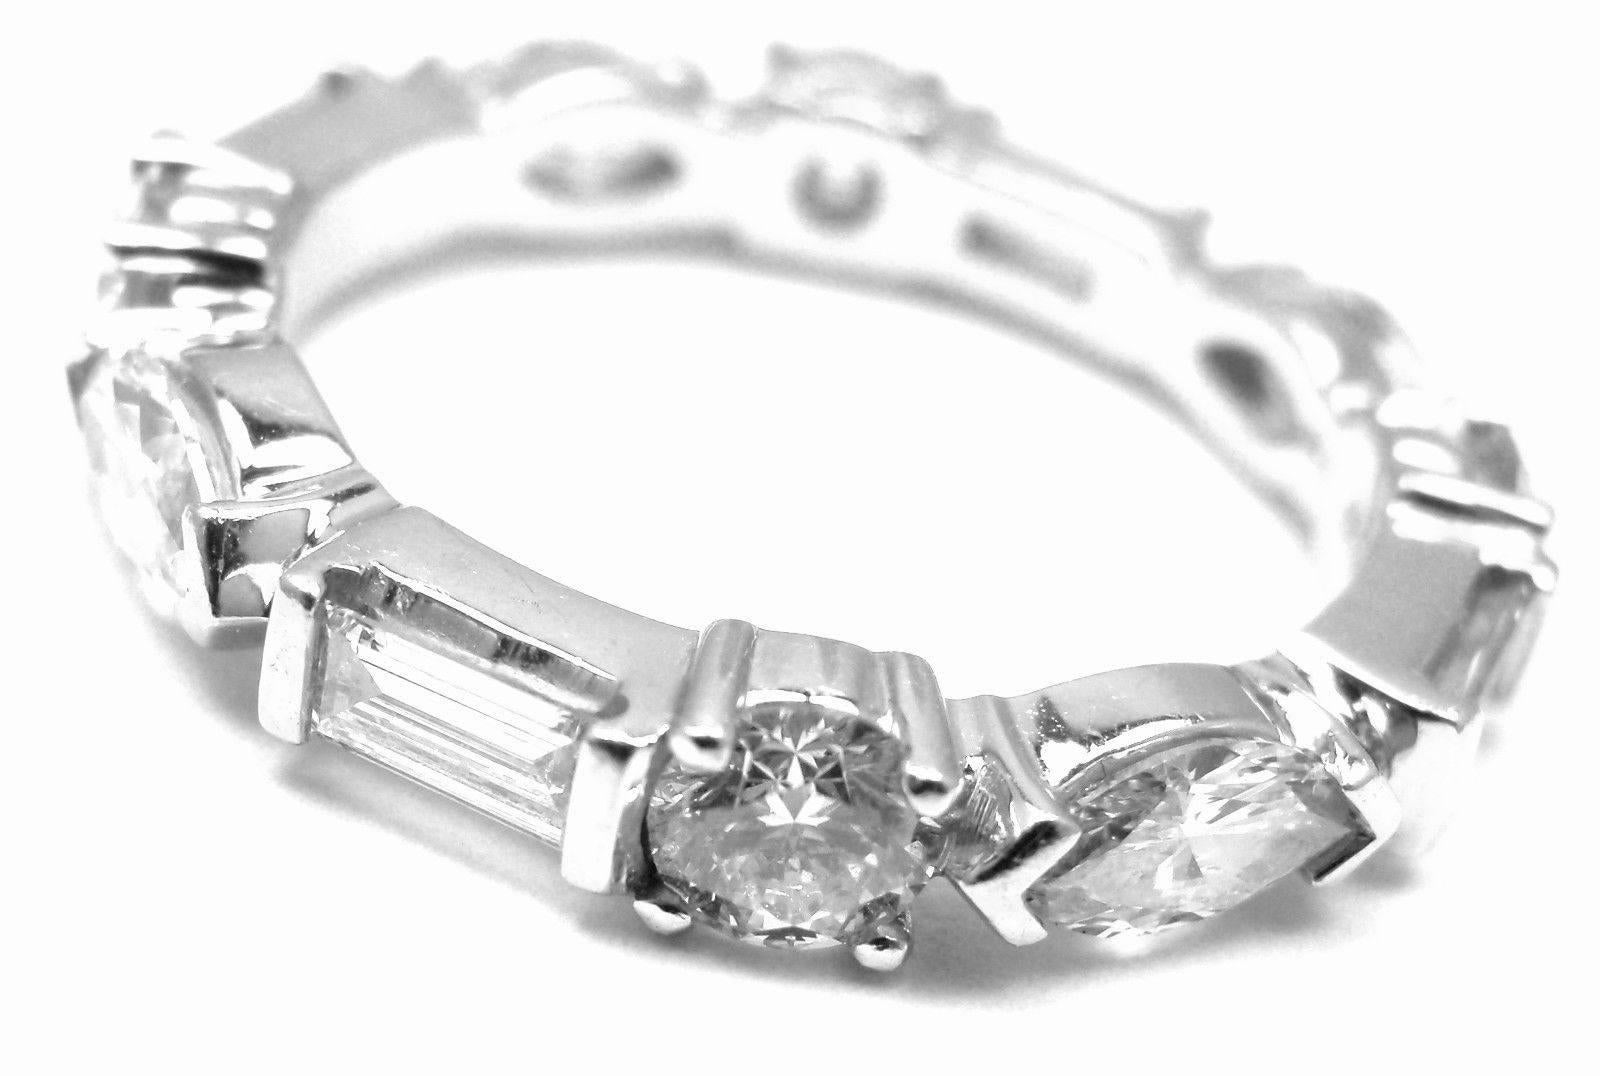 18k White Gold Mixed Cut Diamond Band Ring by Ivanka Trump.
With mixed cut diamonds total weight approx 1.84ct VS2 clarity, G color

Details:
Ring Size: 6
Weight:  3.6 grams
Width: 4mm
Stamped Hallmarks: Ivanka Trump 750
*Free Shipping